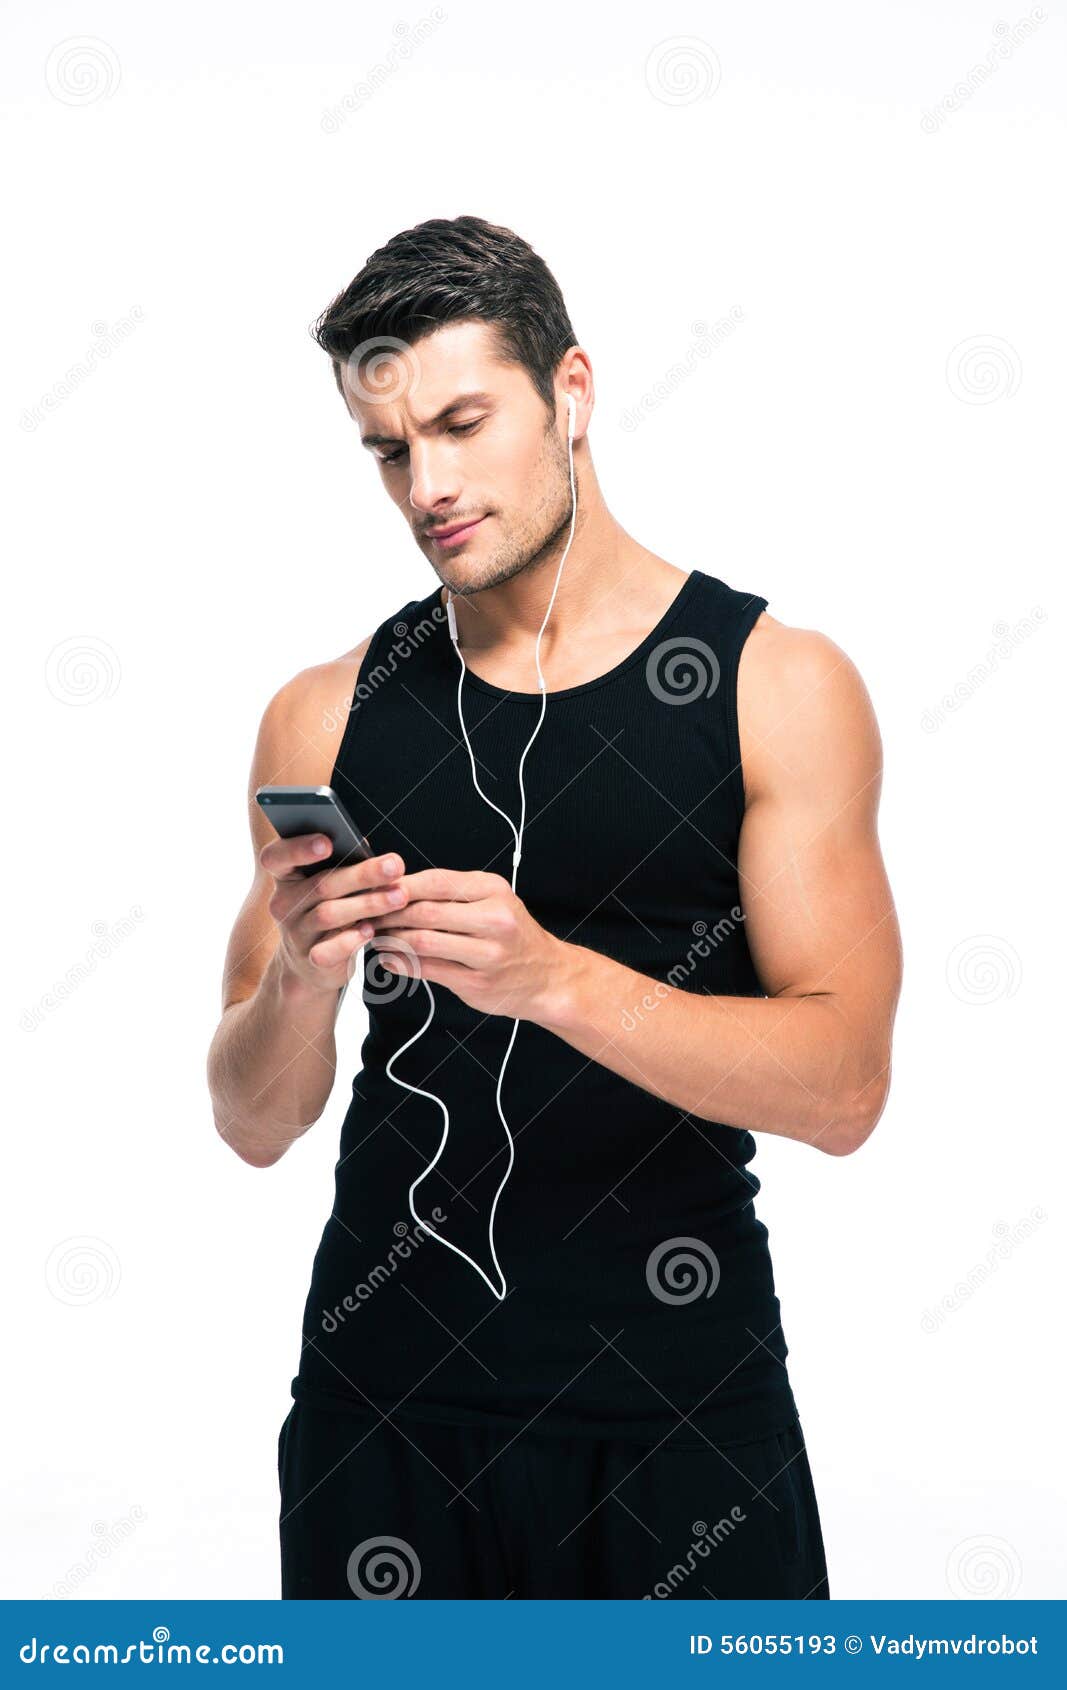 Fitness Man Using Smartphone With Headphones Stock Image - Image of ...